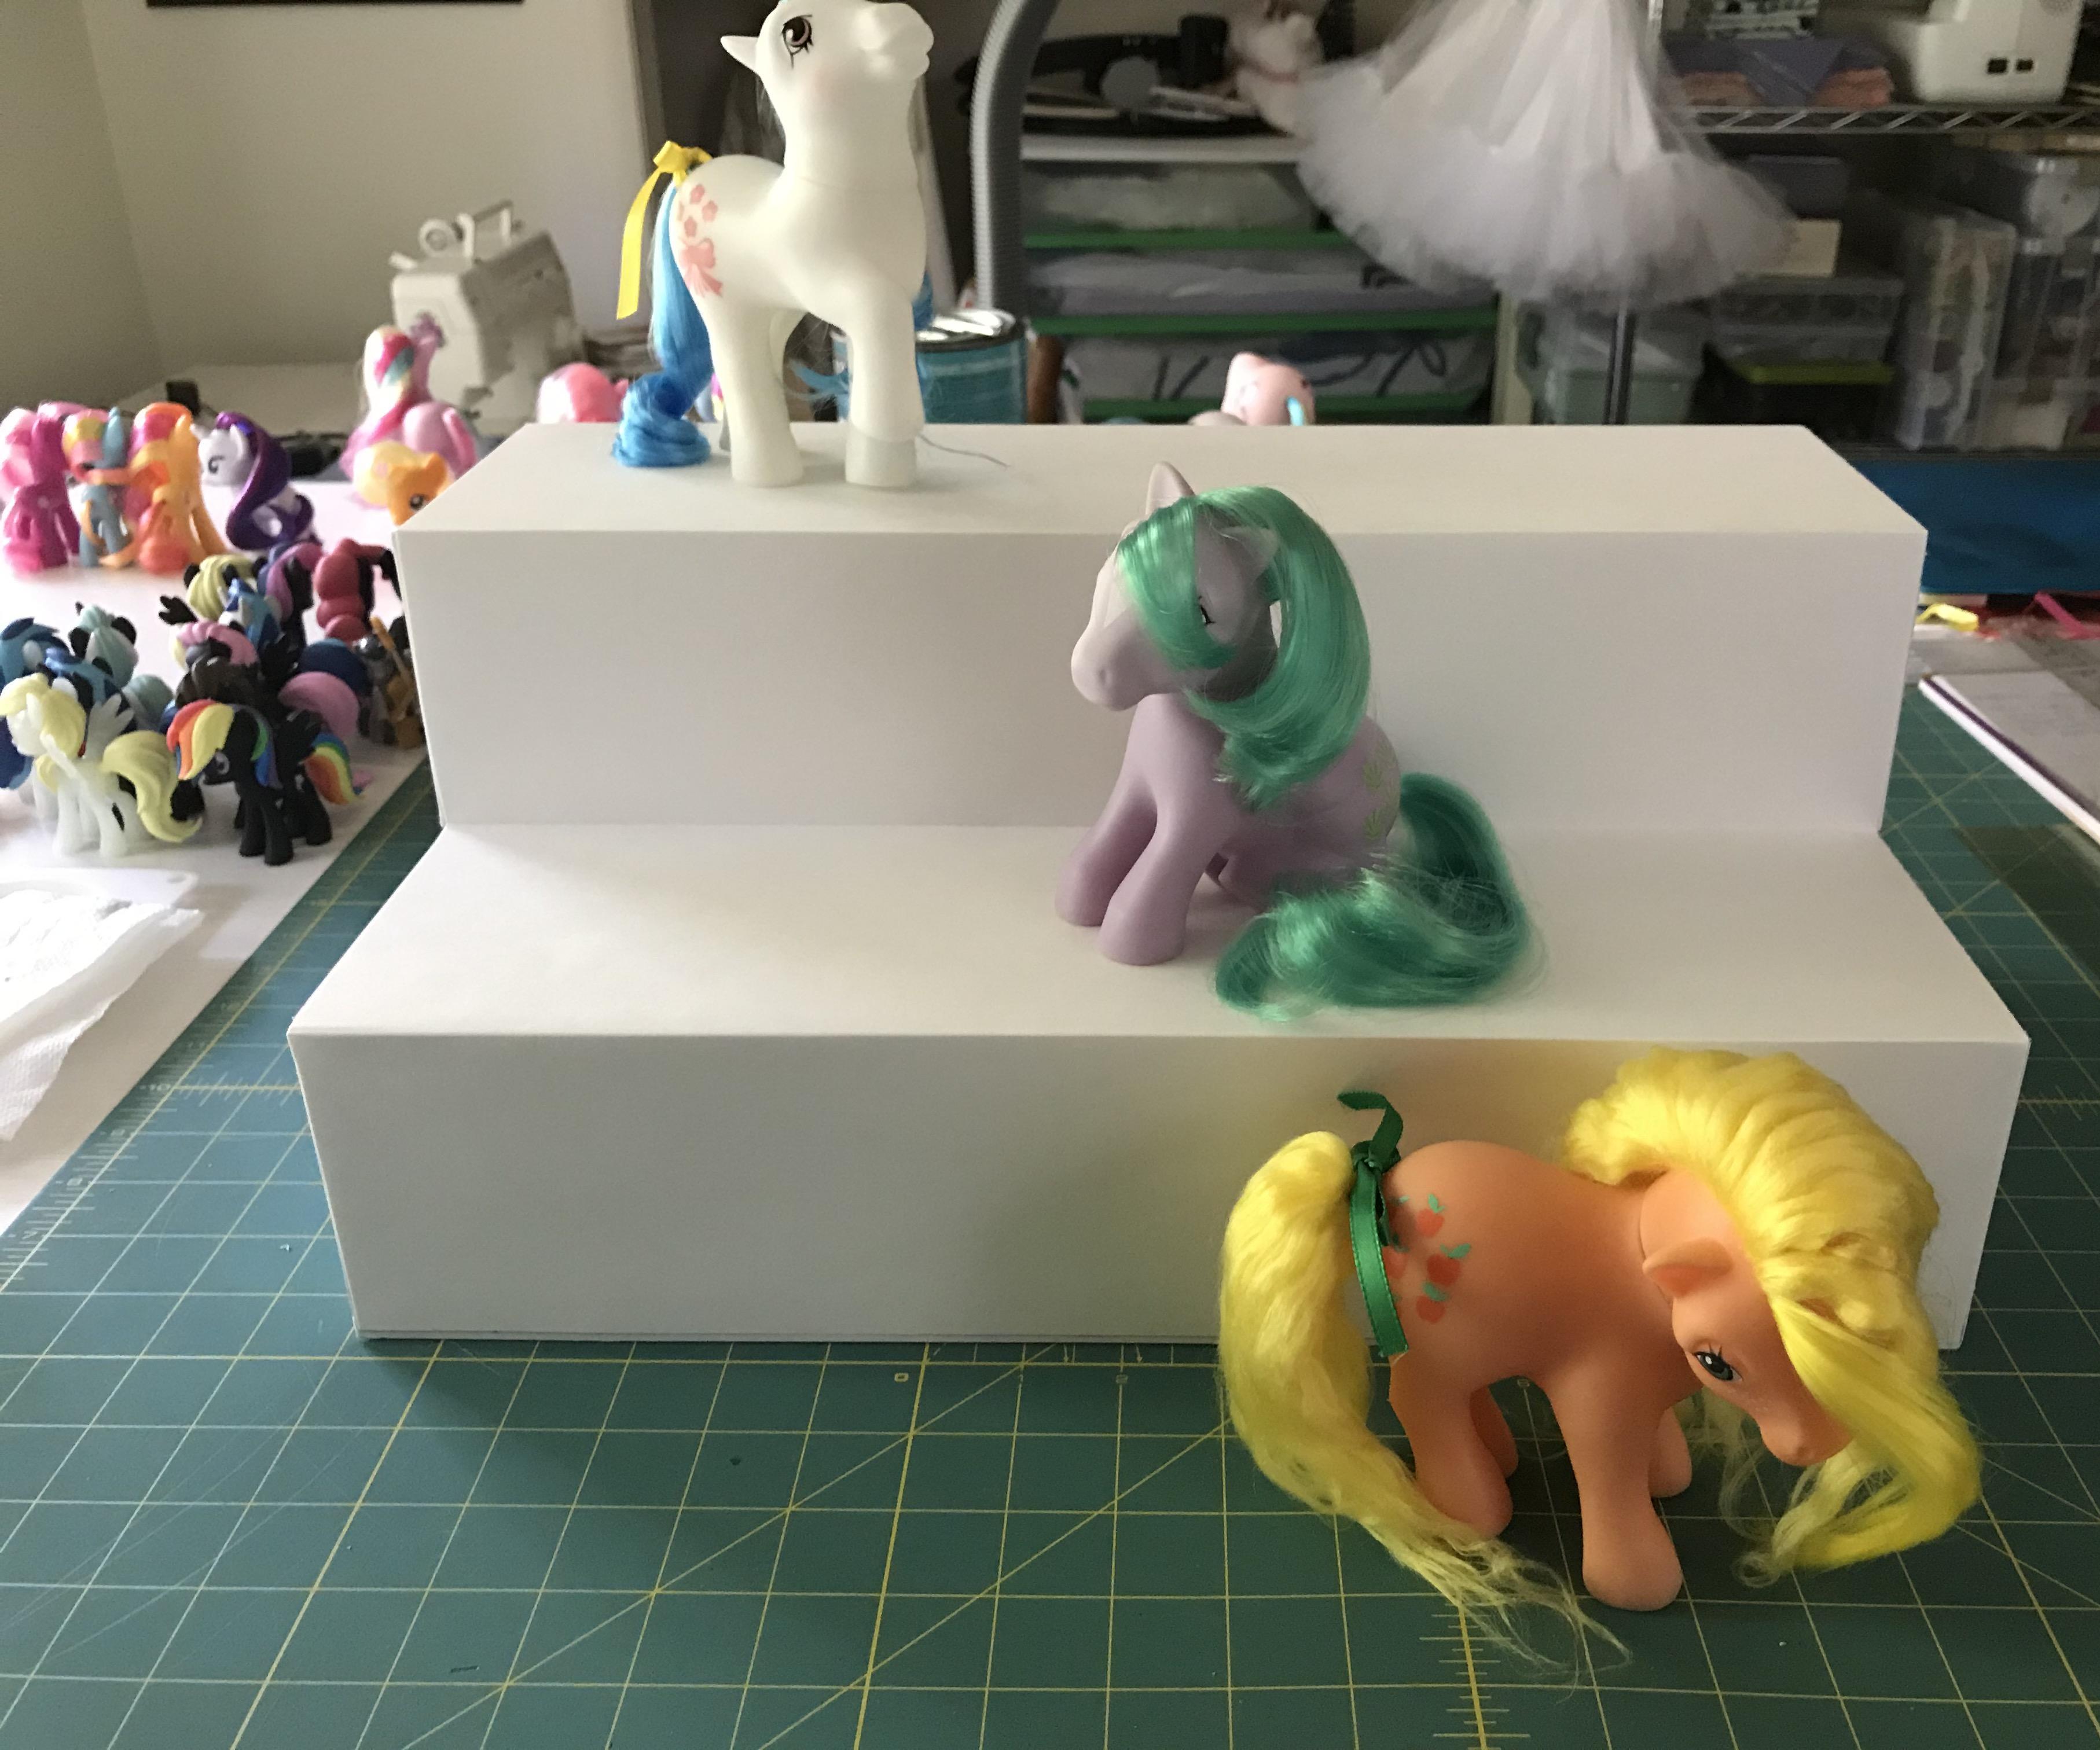 How to Make Display Risers From Foam Board